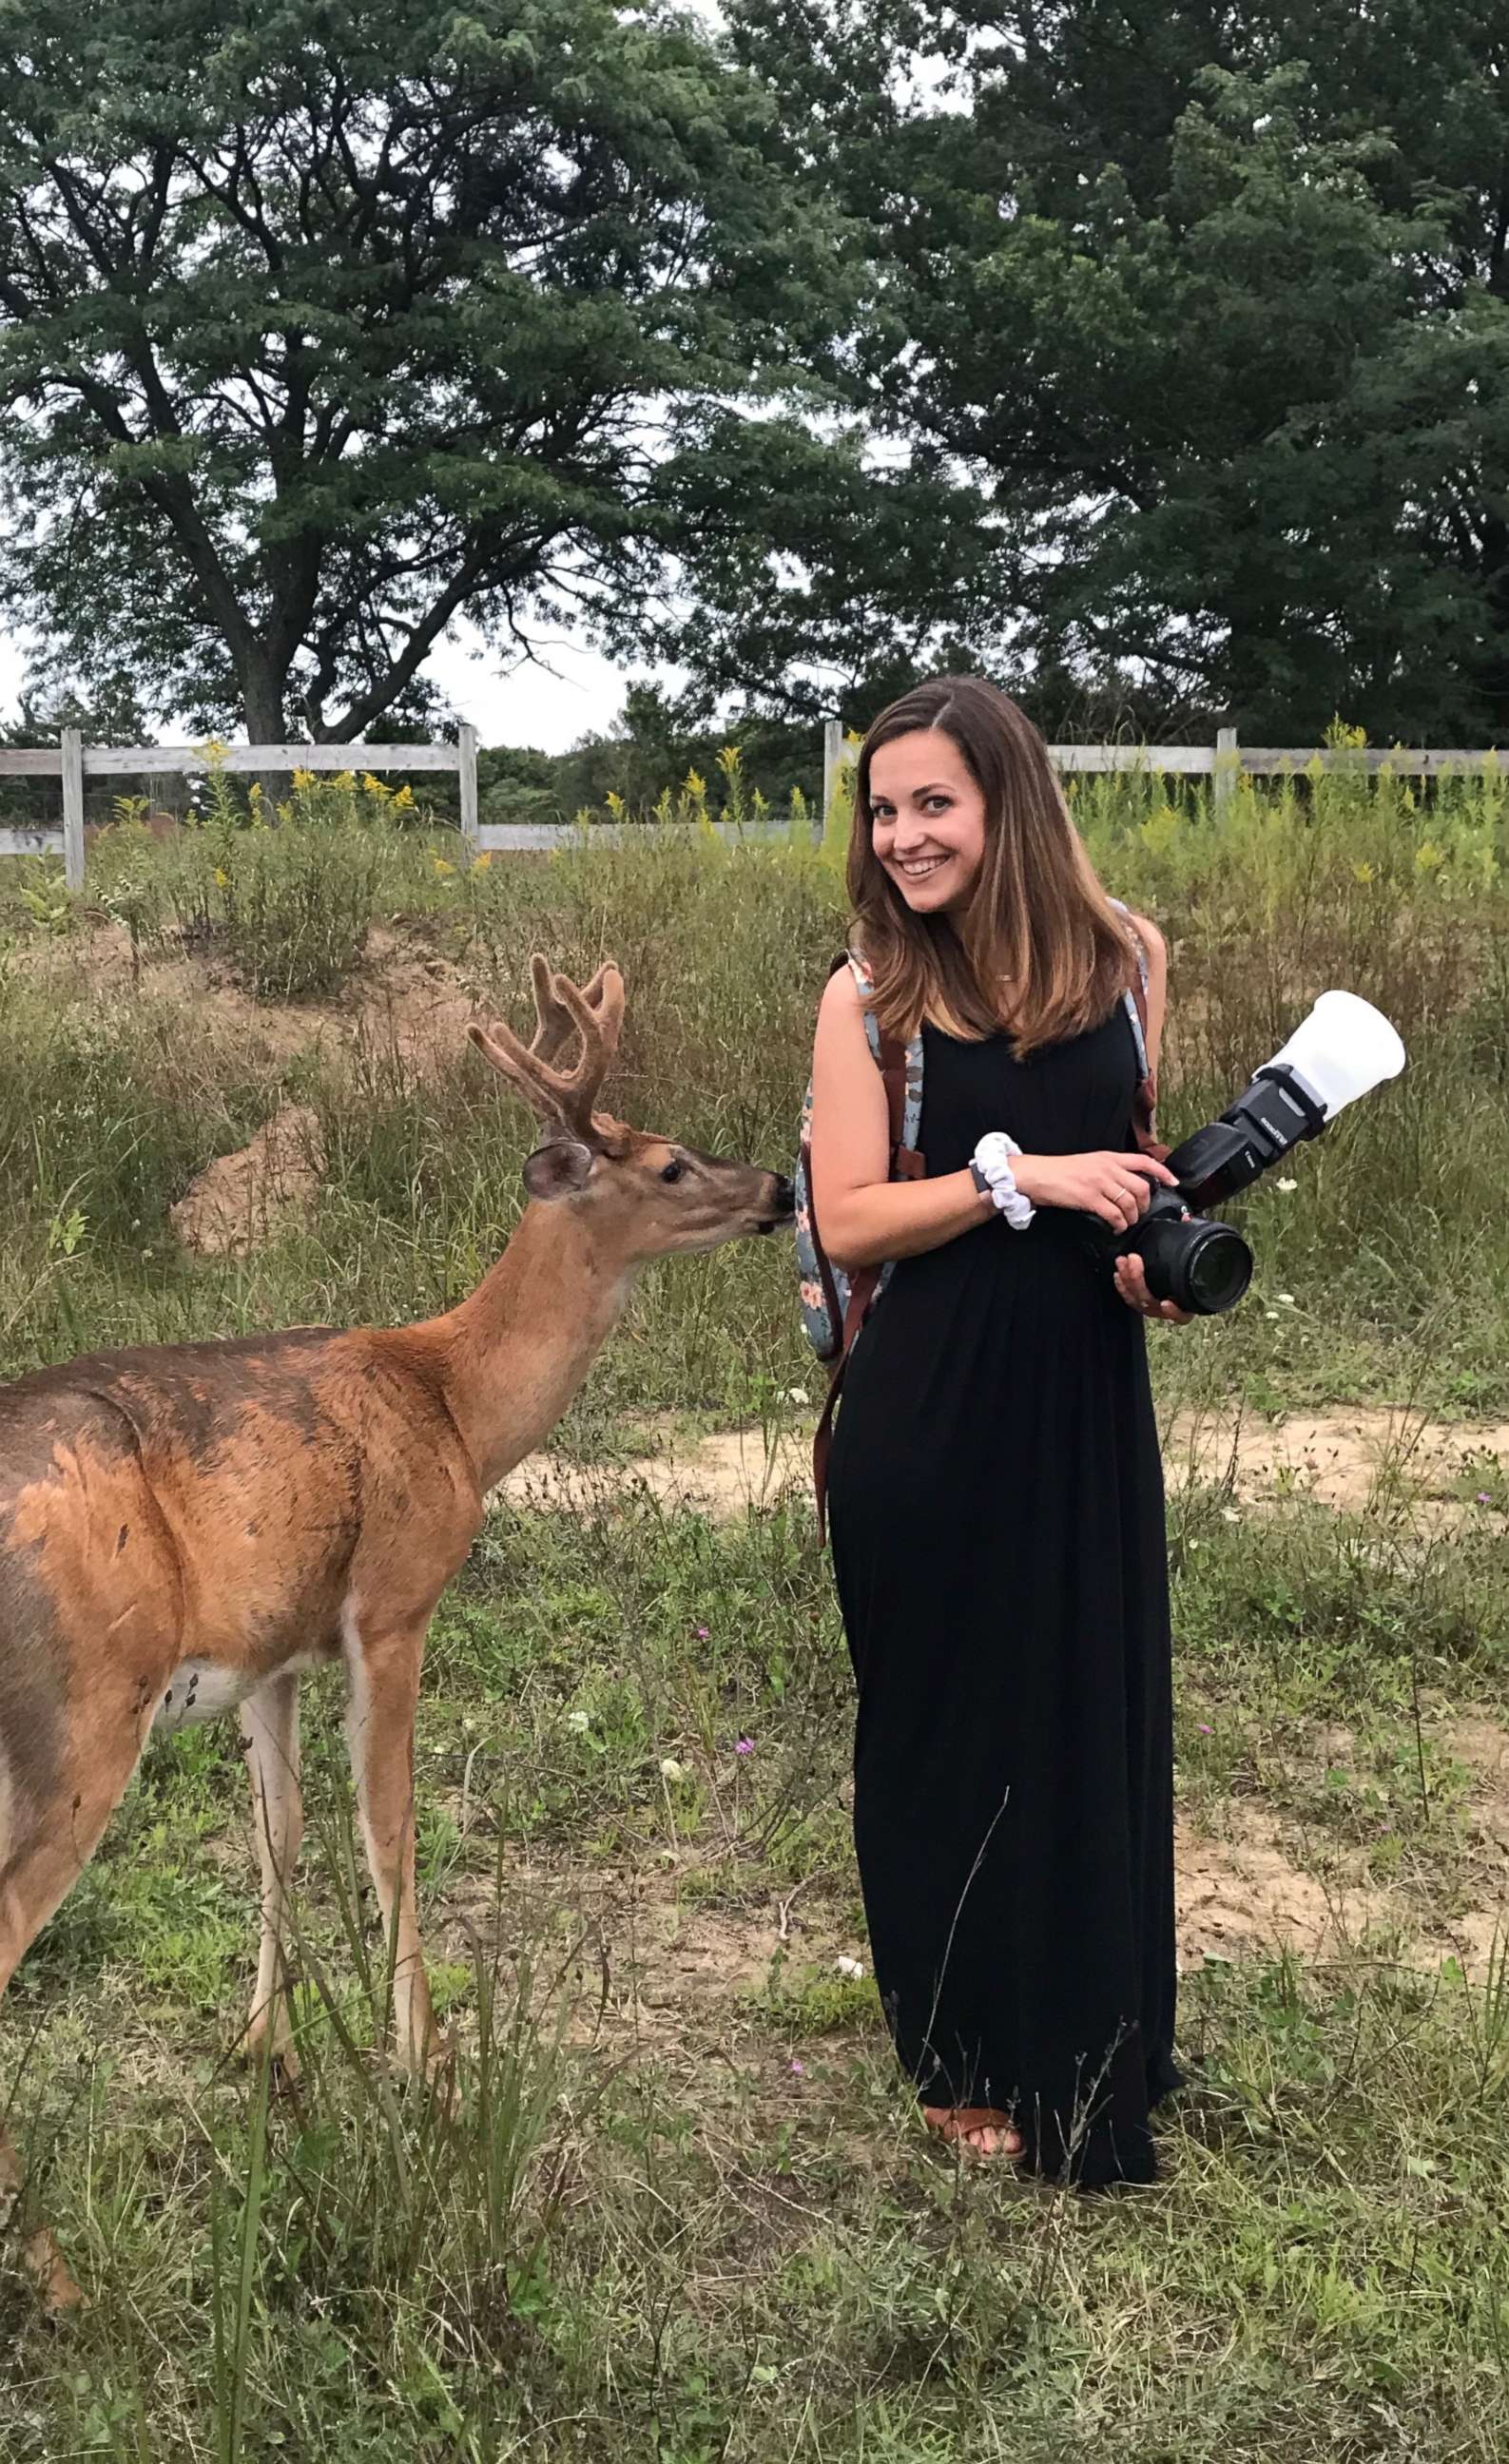 PHOTO: Photographer Laurenda Marie poses next to the deer that surprised her while she was taking wedding photos for the Mackleys.